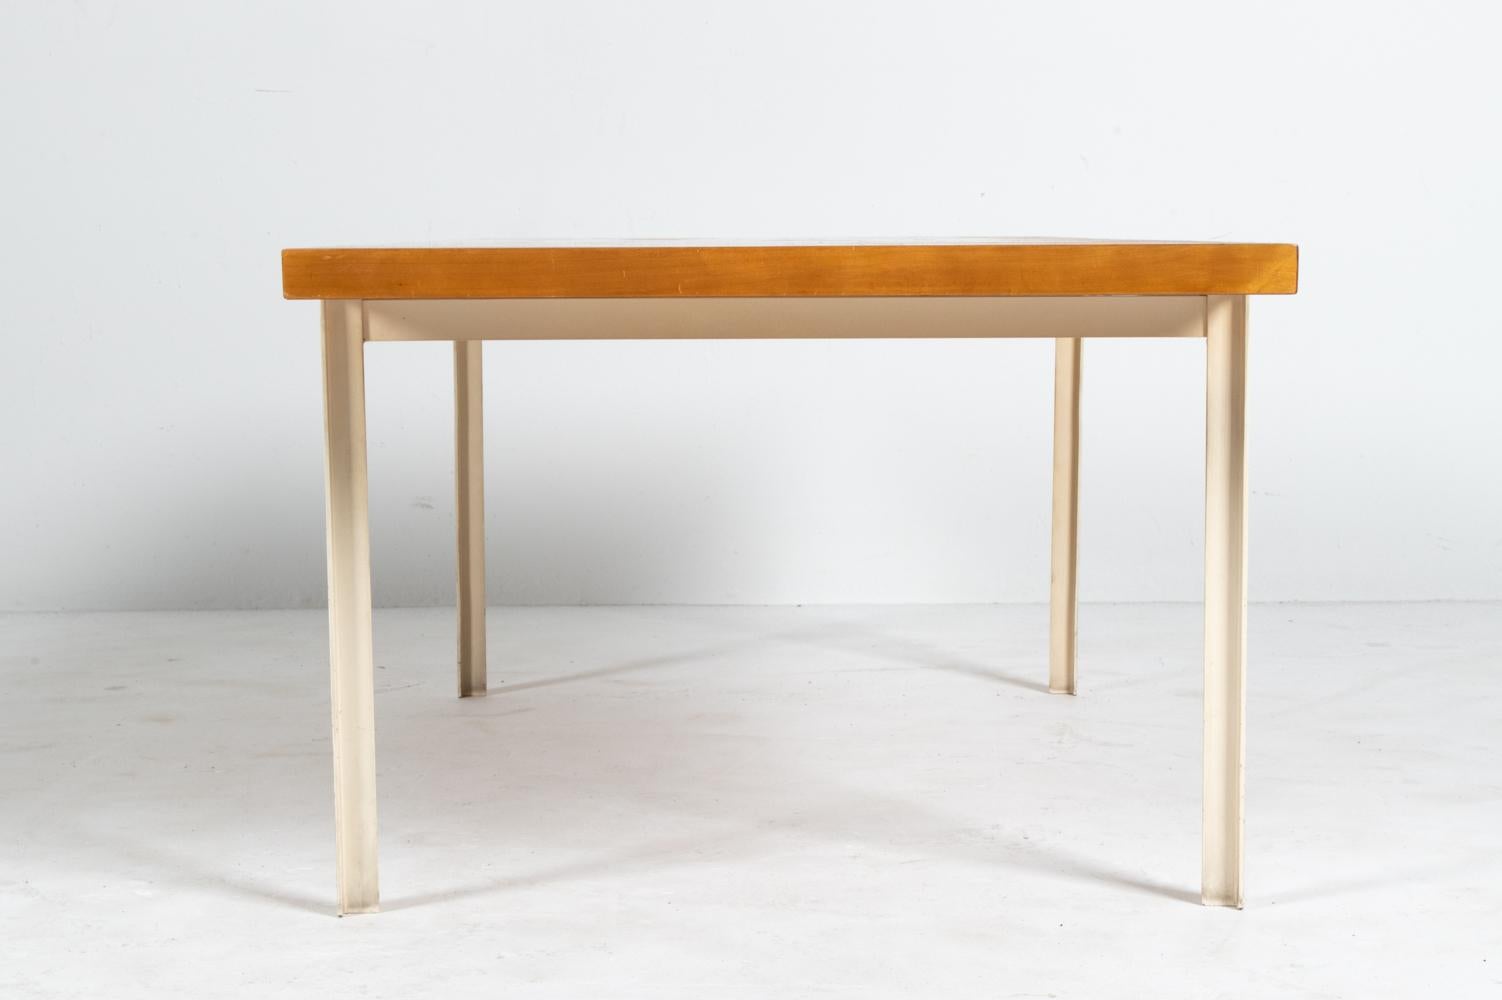 Rare Florence Knoll T-Angle Coffee Table in Birch; Knoll International c. 1960's For Sale 8